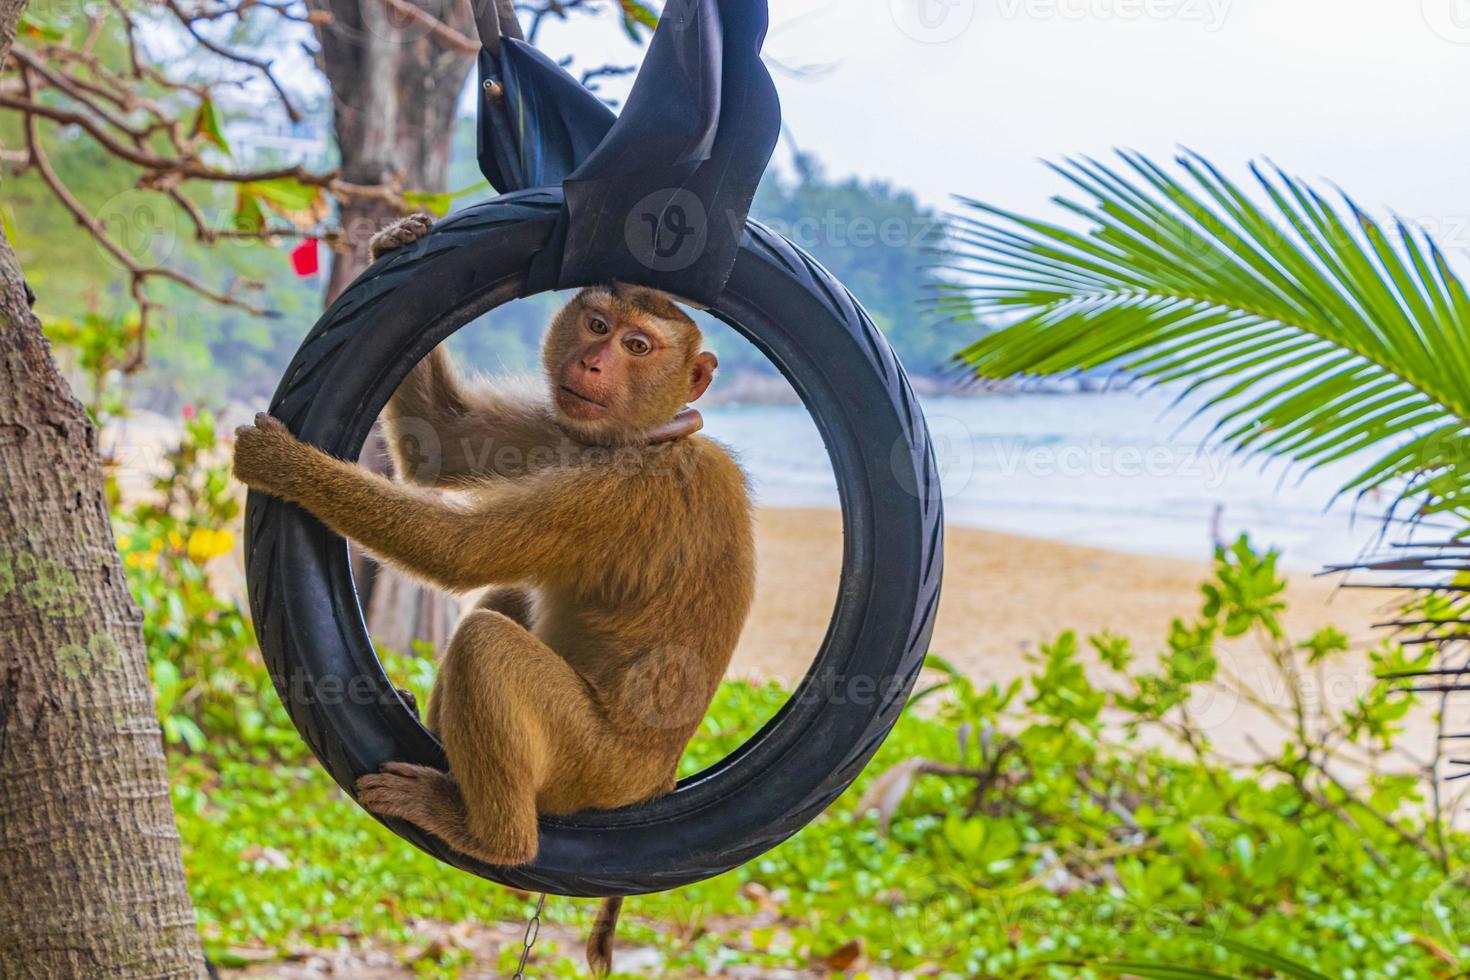 Monkey macaque chained on tires in jungle on beach Thailand. photo